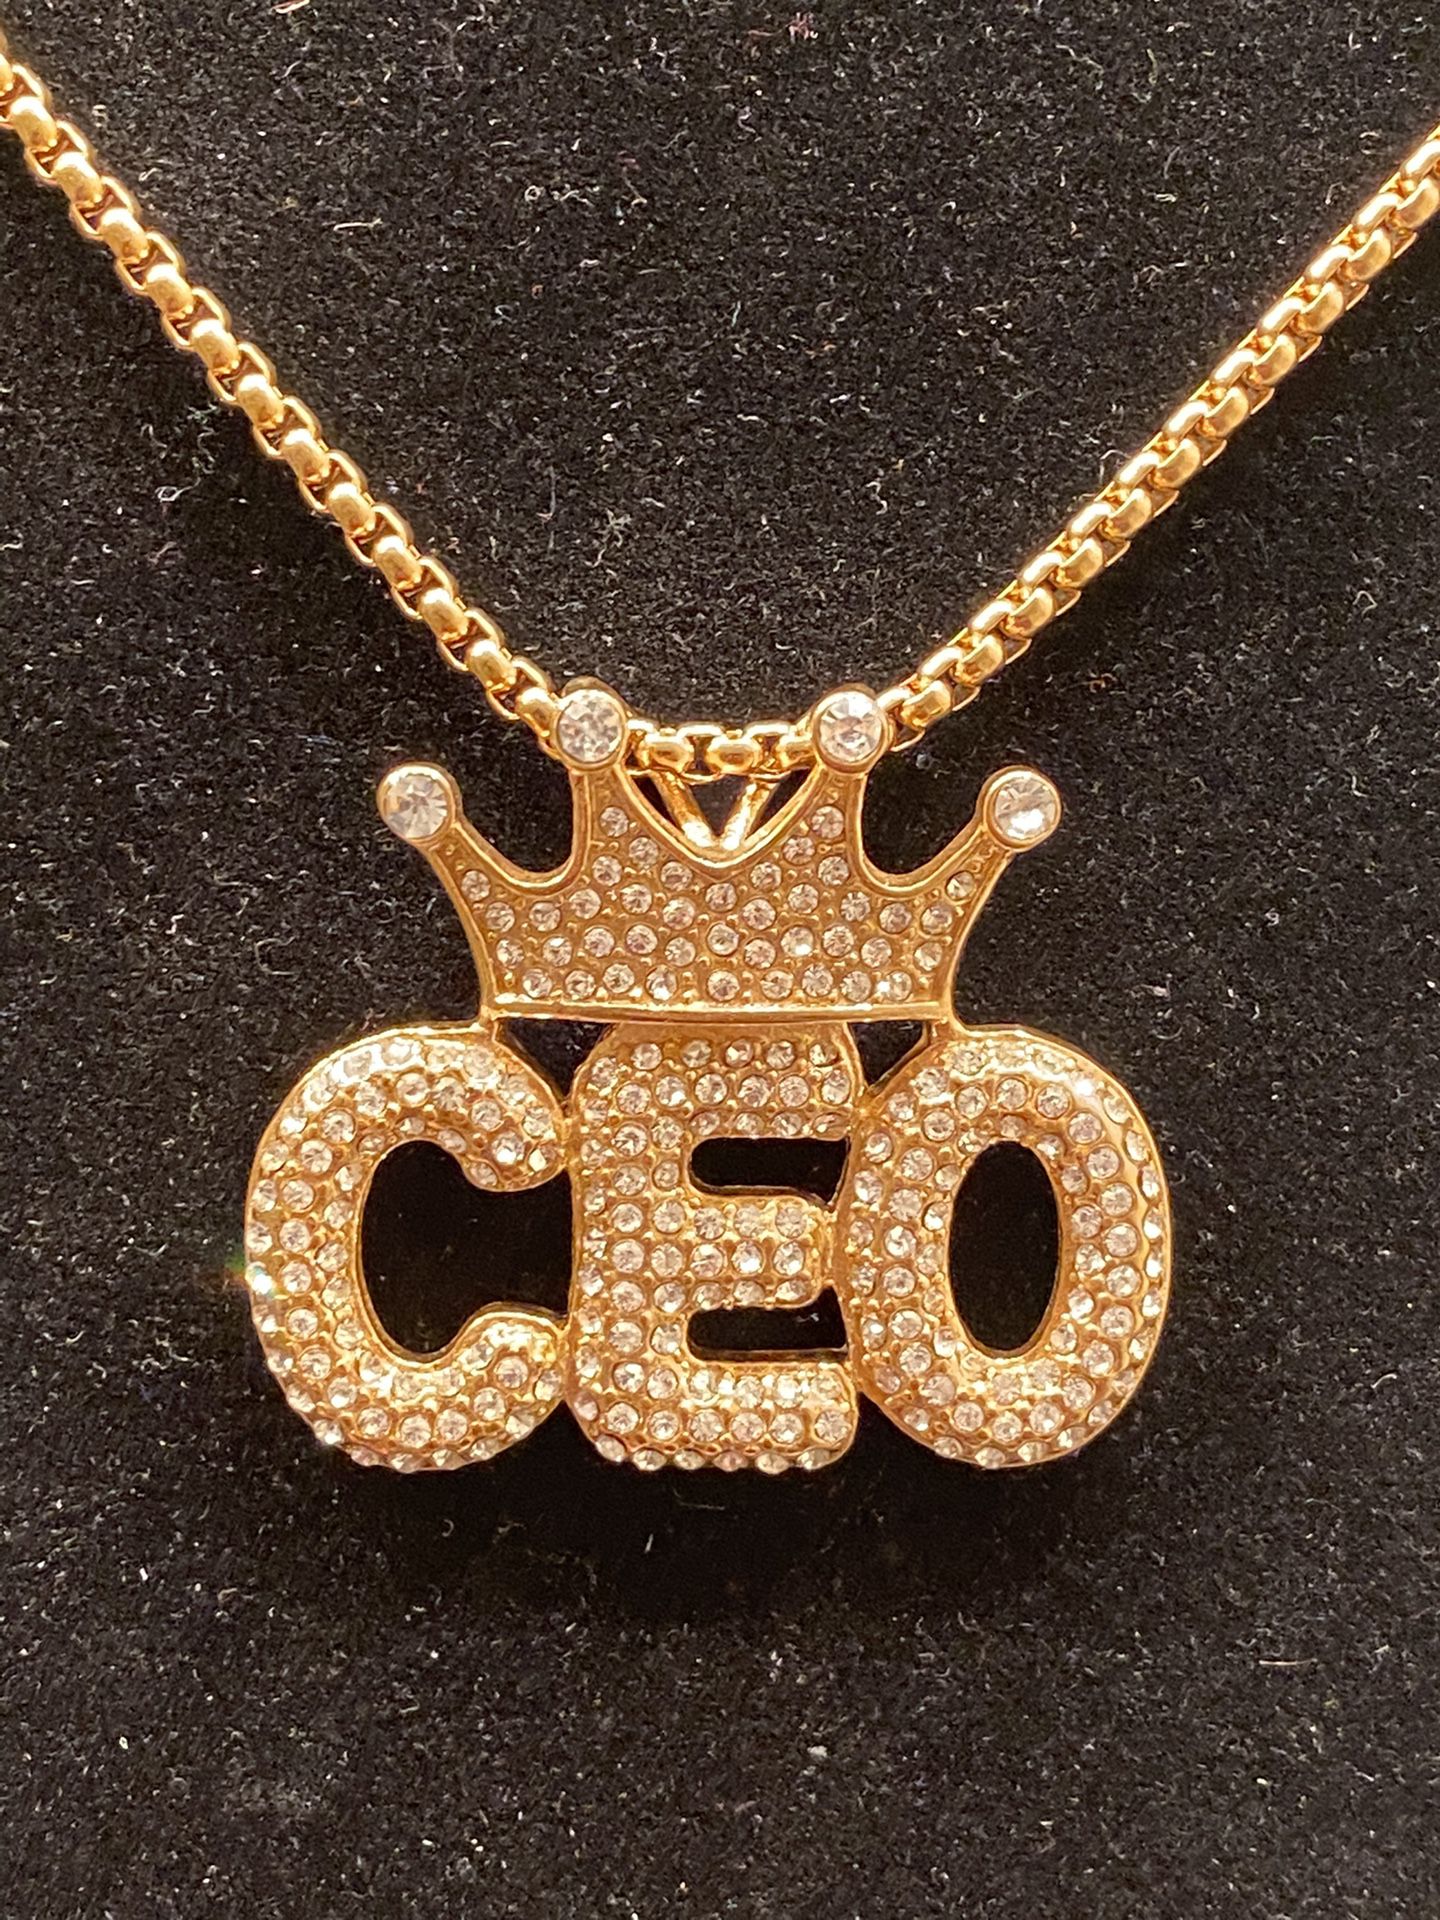 Gold CEO pendant with chain